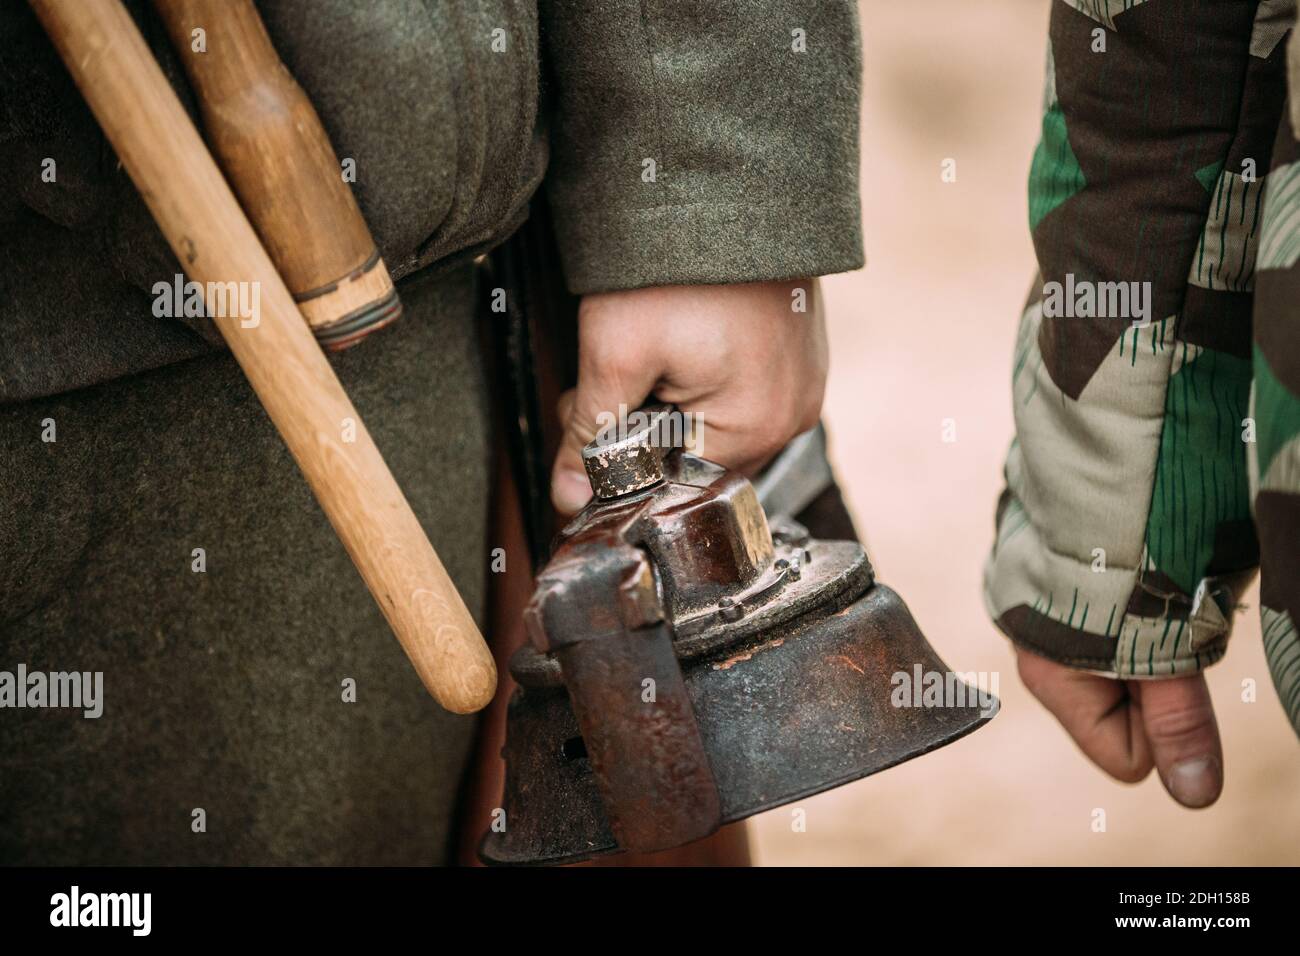 Close Up Of German Military Ammunition Of A German Wehrmacht Soldier. Re-enactor Dressed As World War II German Soldiers Holding Handy Siren, Alarm Stock Photo